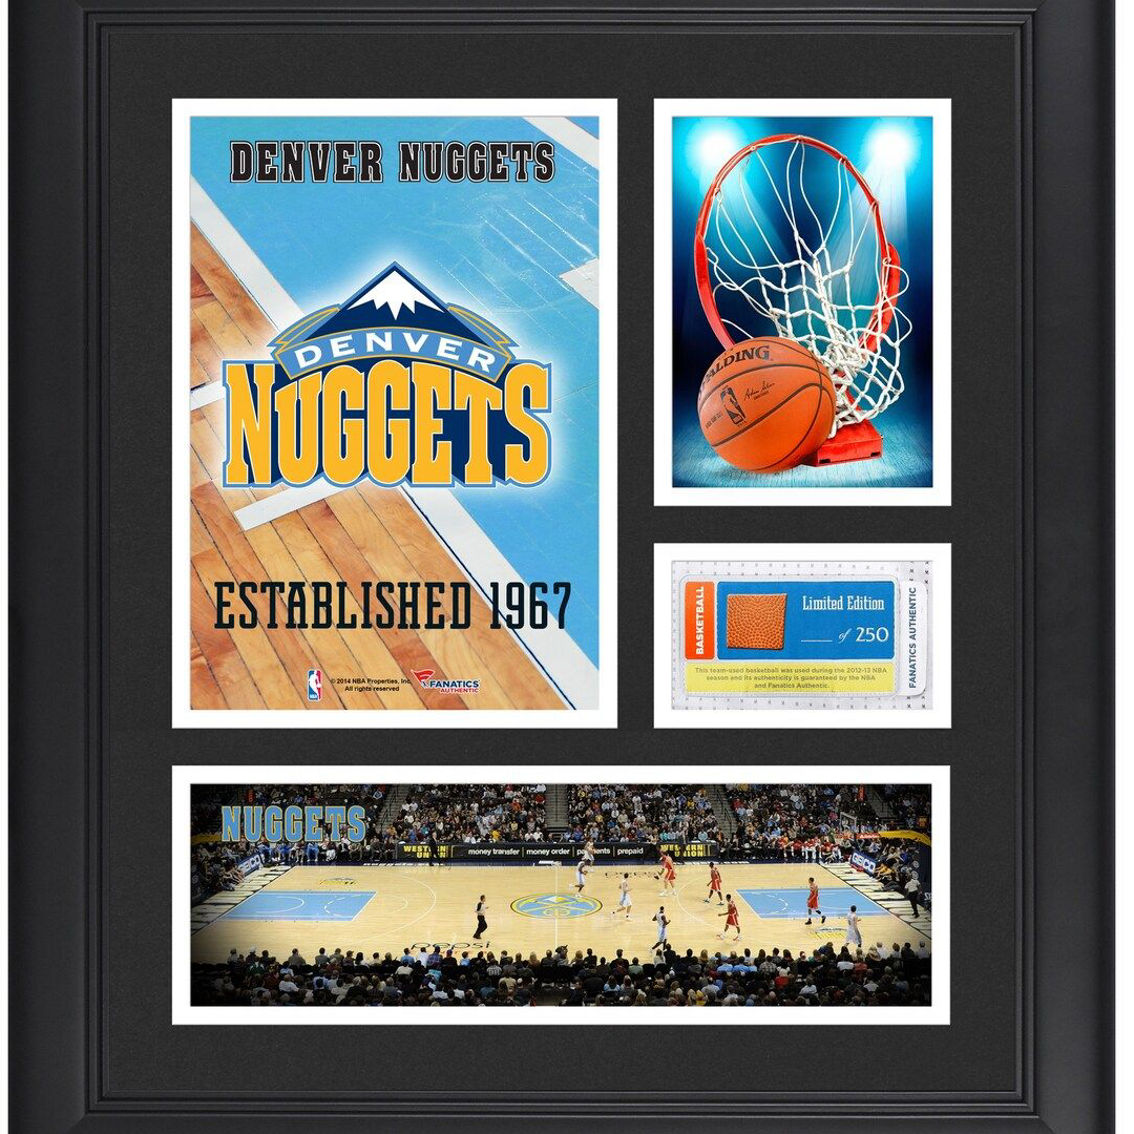 Fanatics Authentic Denver Nuggets Framed 15'' x 17'' Team Logo Collage with Team-Used Basketball - Limited Edition of 250 - Image 2 of 2